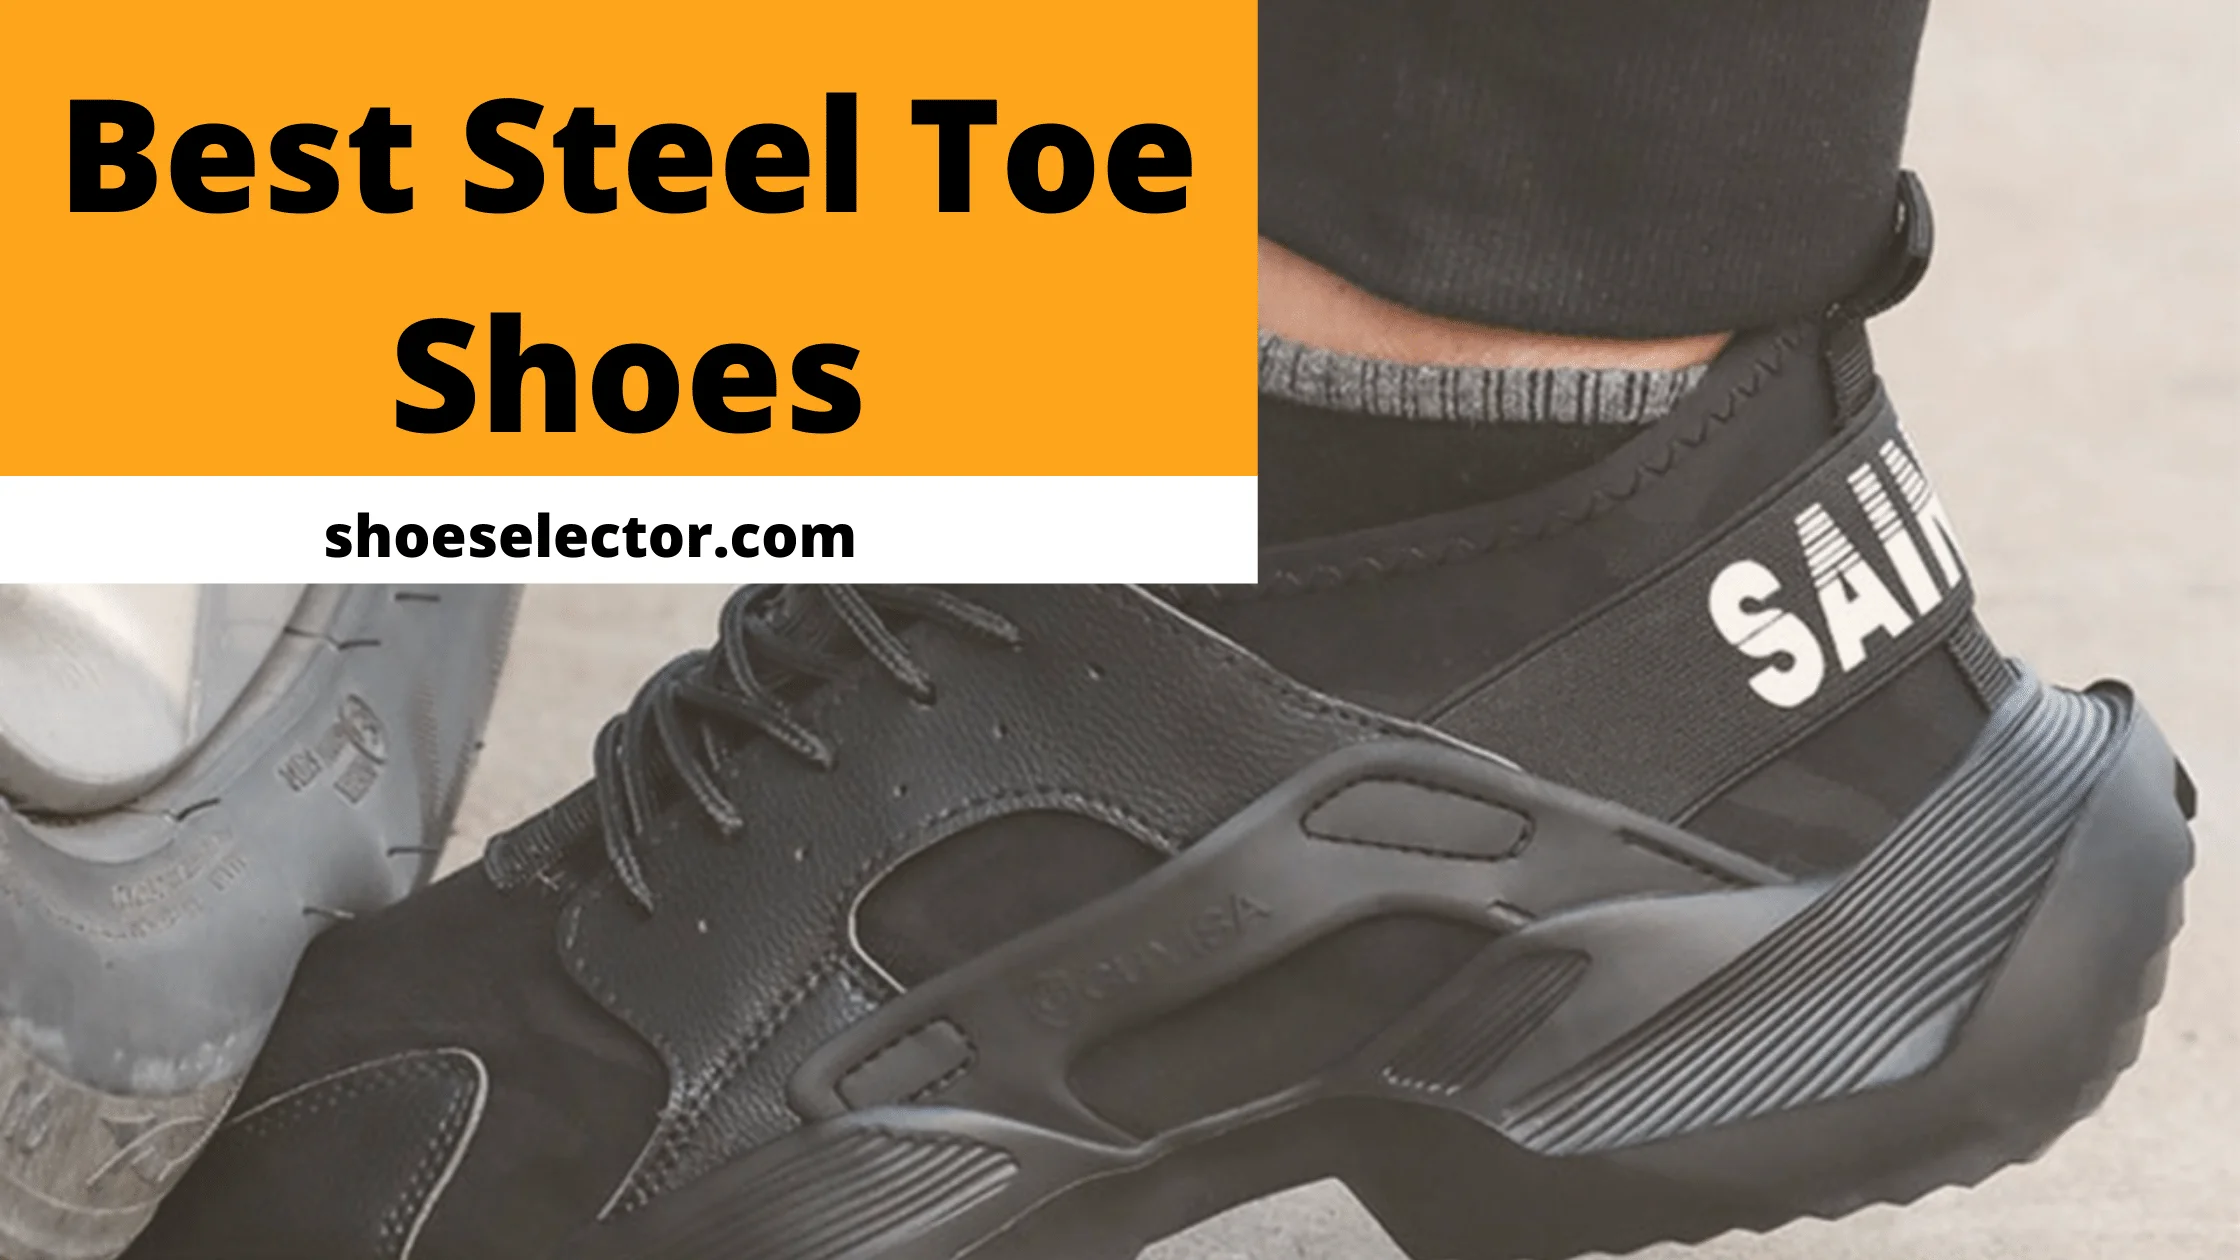 Best Steel Toe Shoes Reviews & Buying Guide 2022